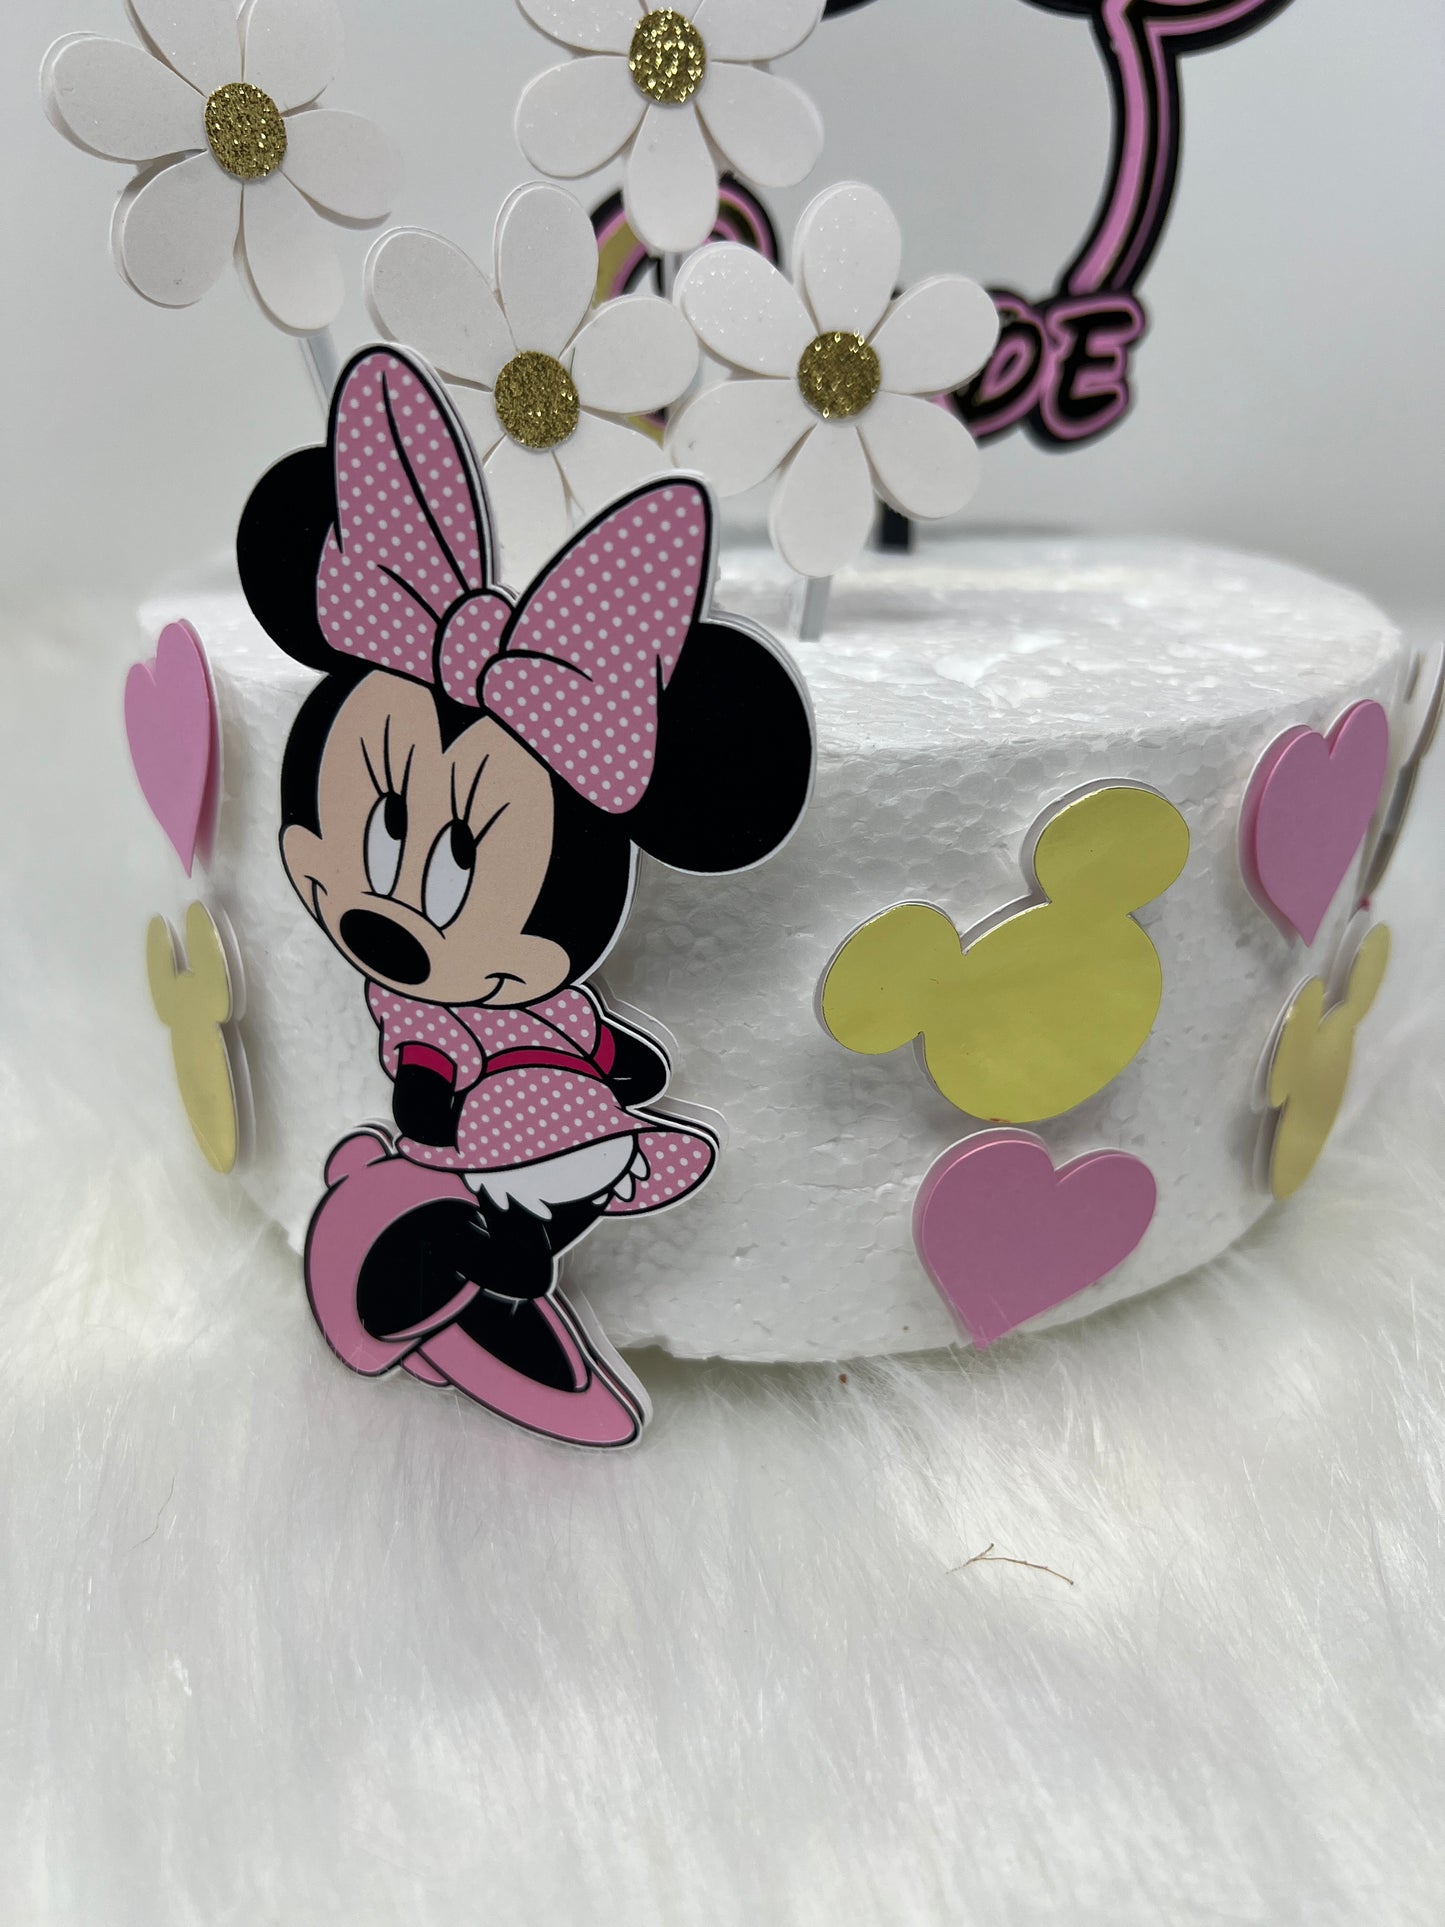 Minnie Mouse Cake Topper, Minnie Mouse Birthday Topper,Minnie Mouse Birthday, Minnie, Minnie Mouse Cake Topper, Pink and Gold Minnie Mouse